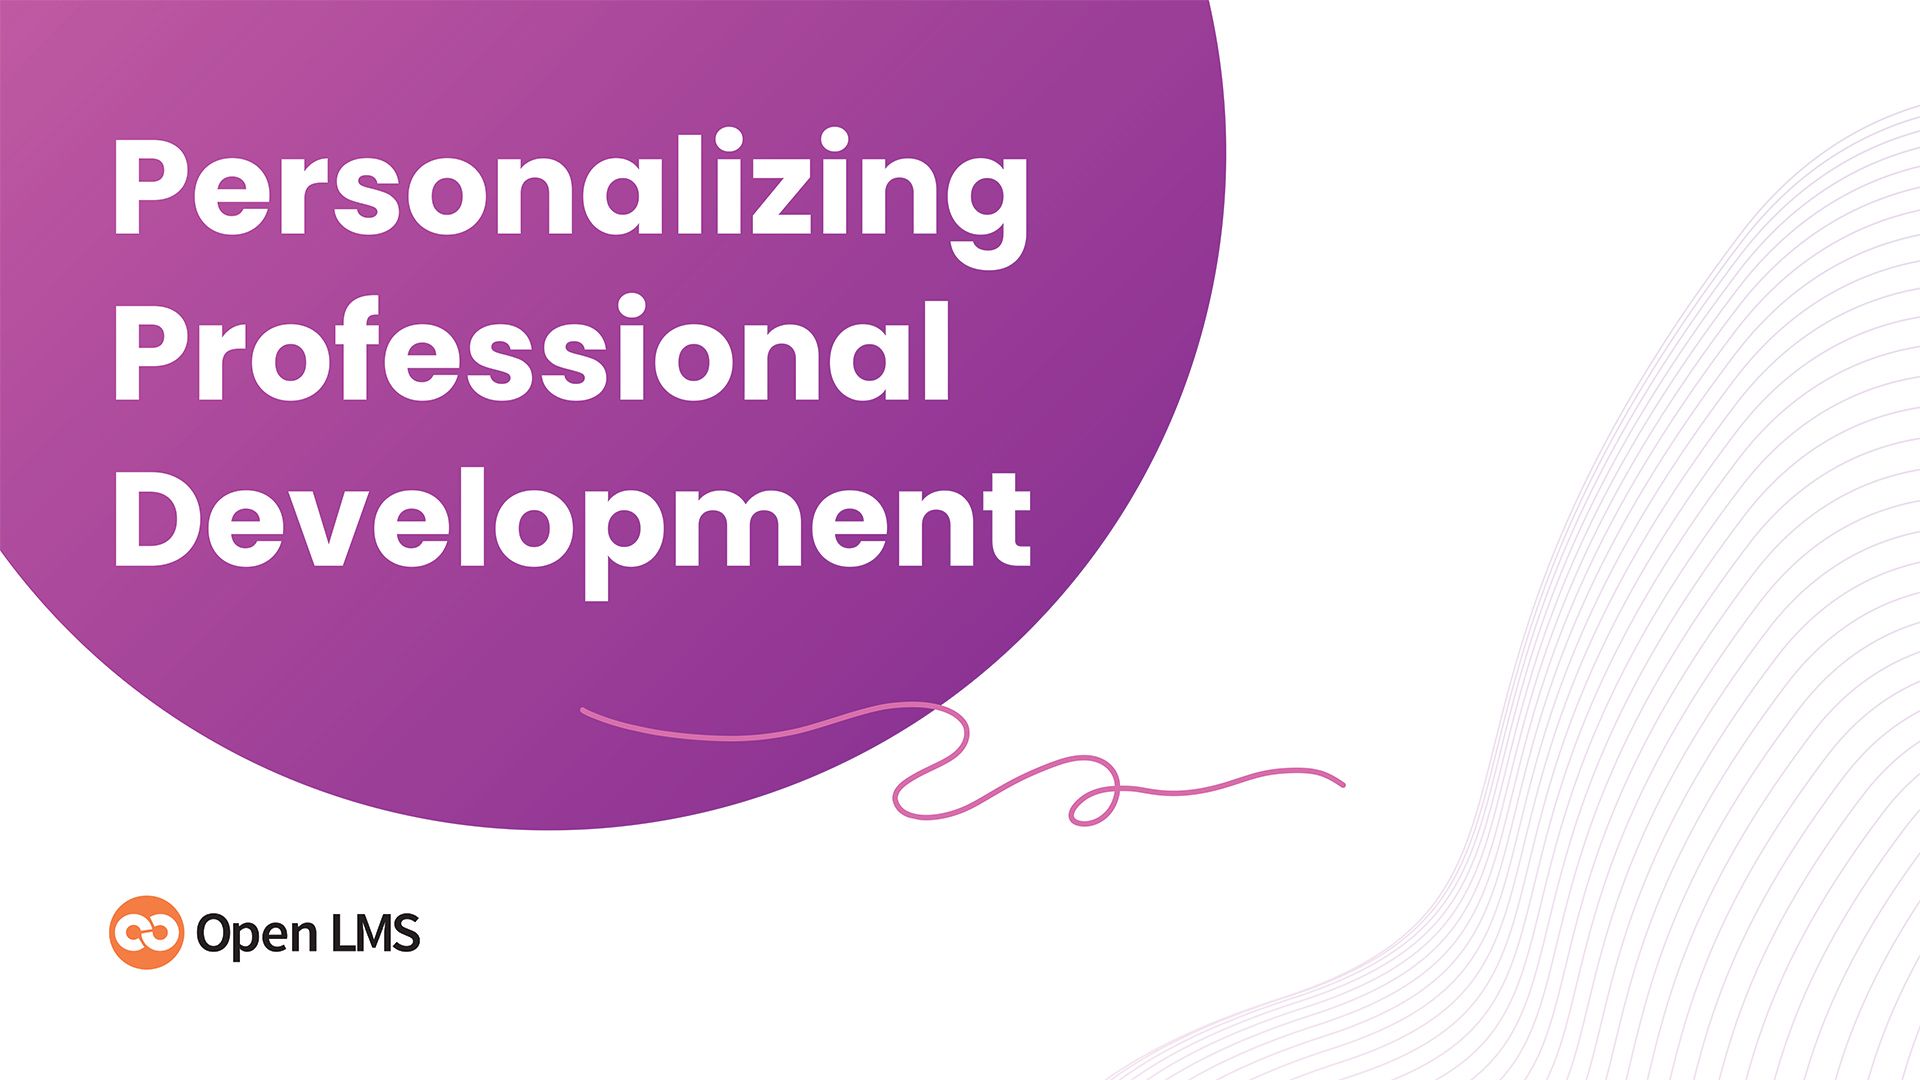 Personalizing Professional Development: What You Need to Know